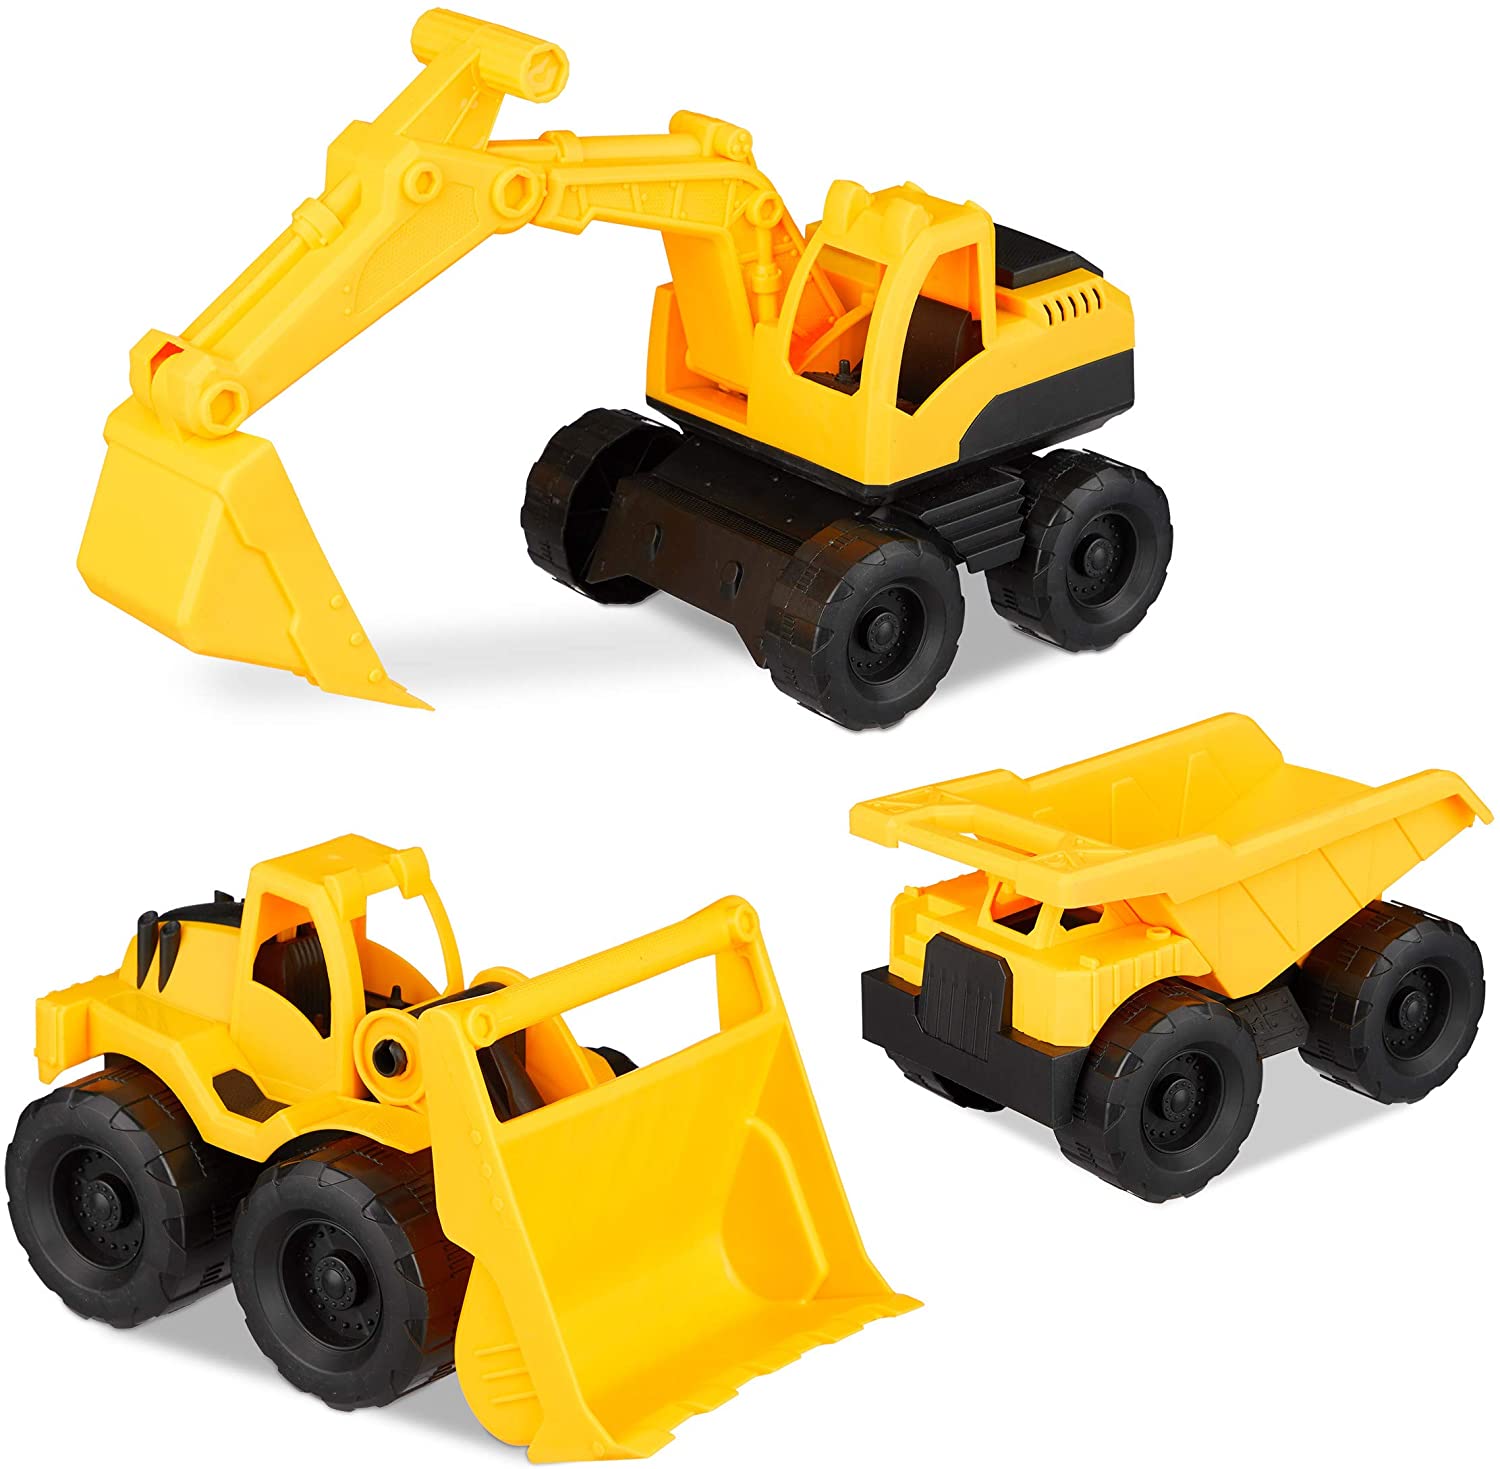 Relaxdays Plastic Construction Vehicles, Set Of 3 With Excavator, Front End